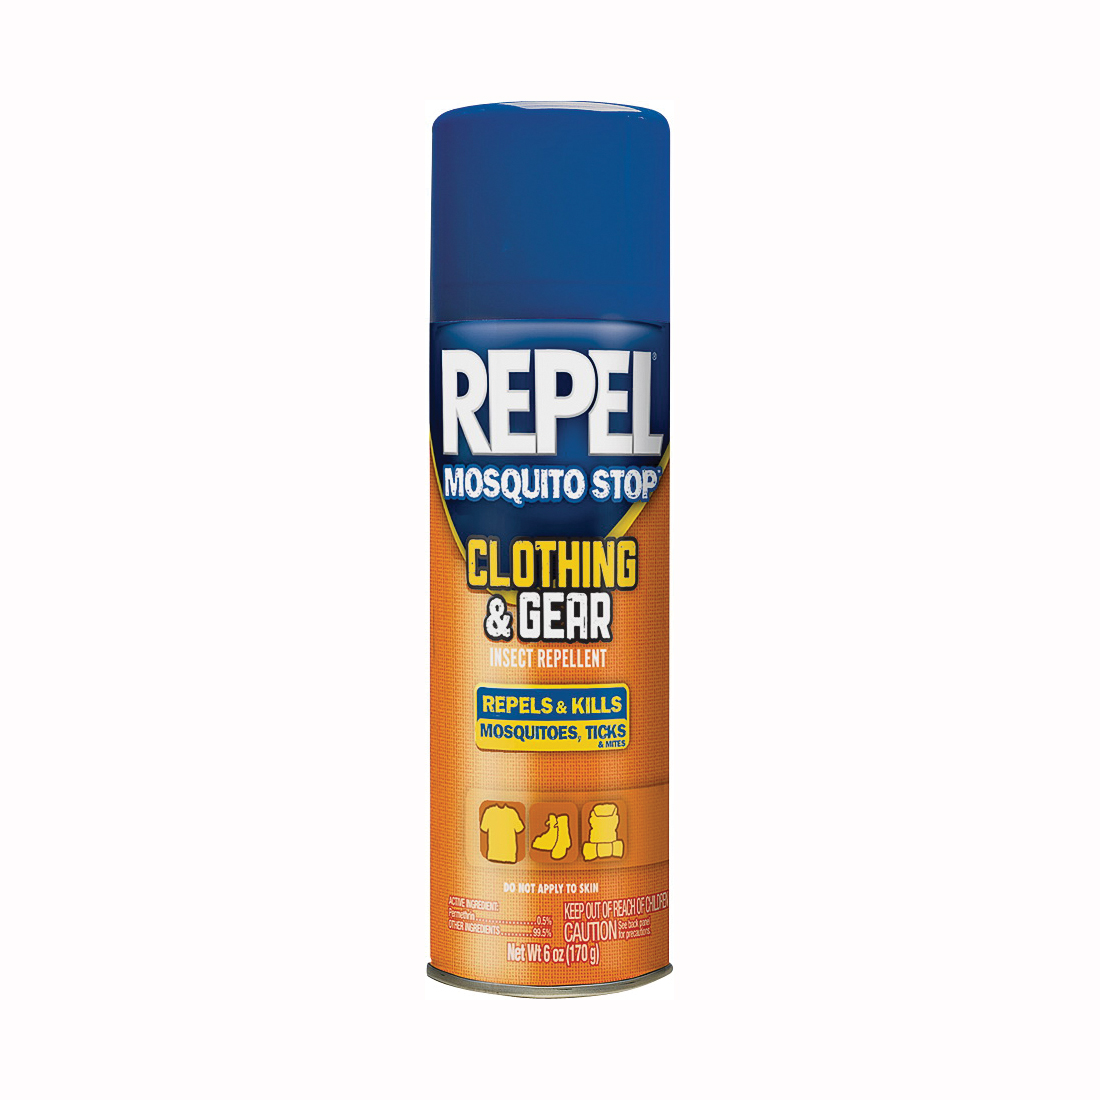 HG-94127 Insect Repellent, 6.5 oz Aerosol Can, Liquid, Milky White, Aliphatic Solvent